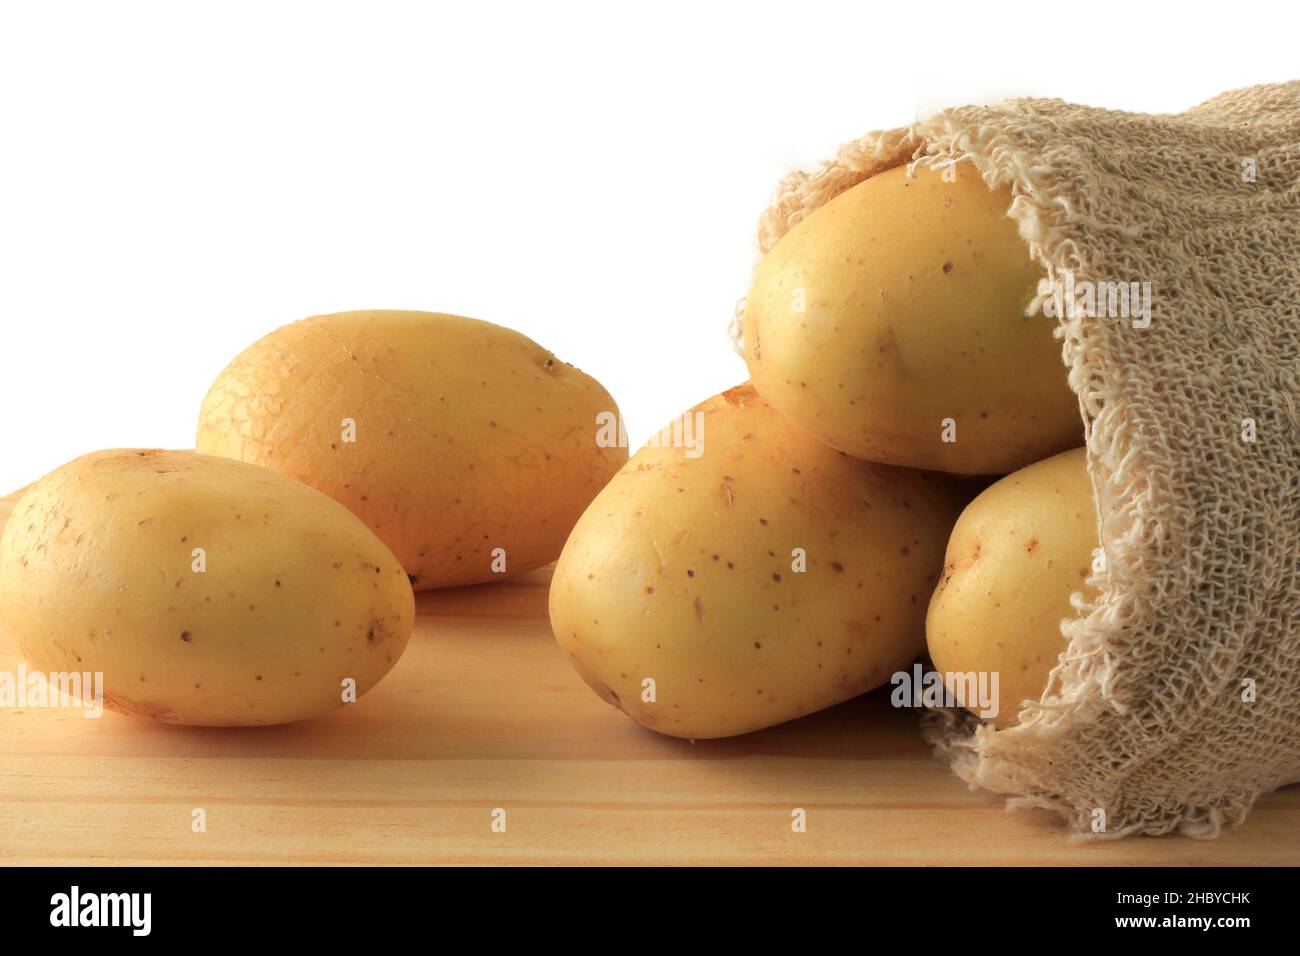 https://c8.alamy.com/comp/2HBYCHK/potato-sticking-out-of-sack-on-wooden-table-white-background-2HBYCHK.jpg